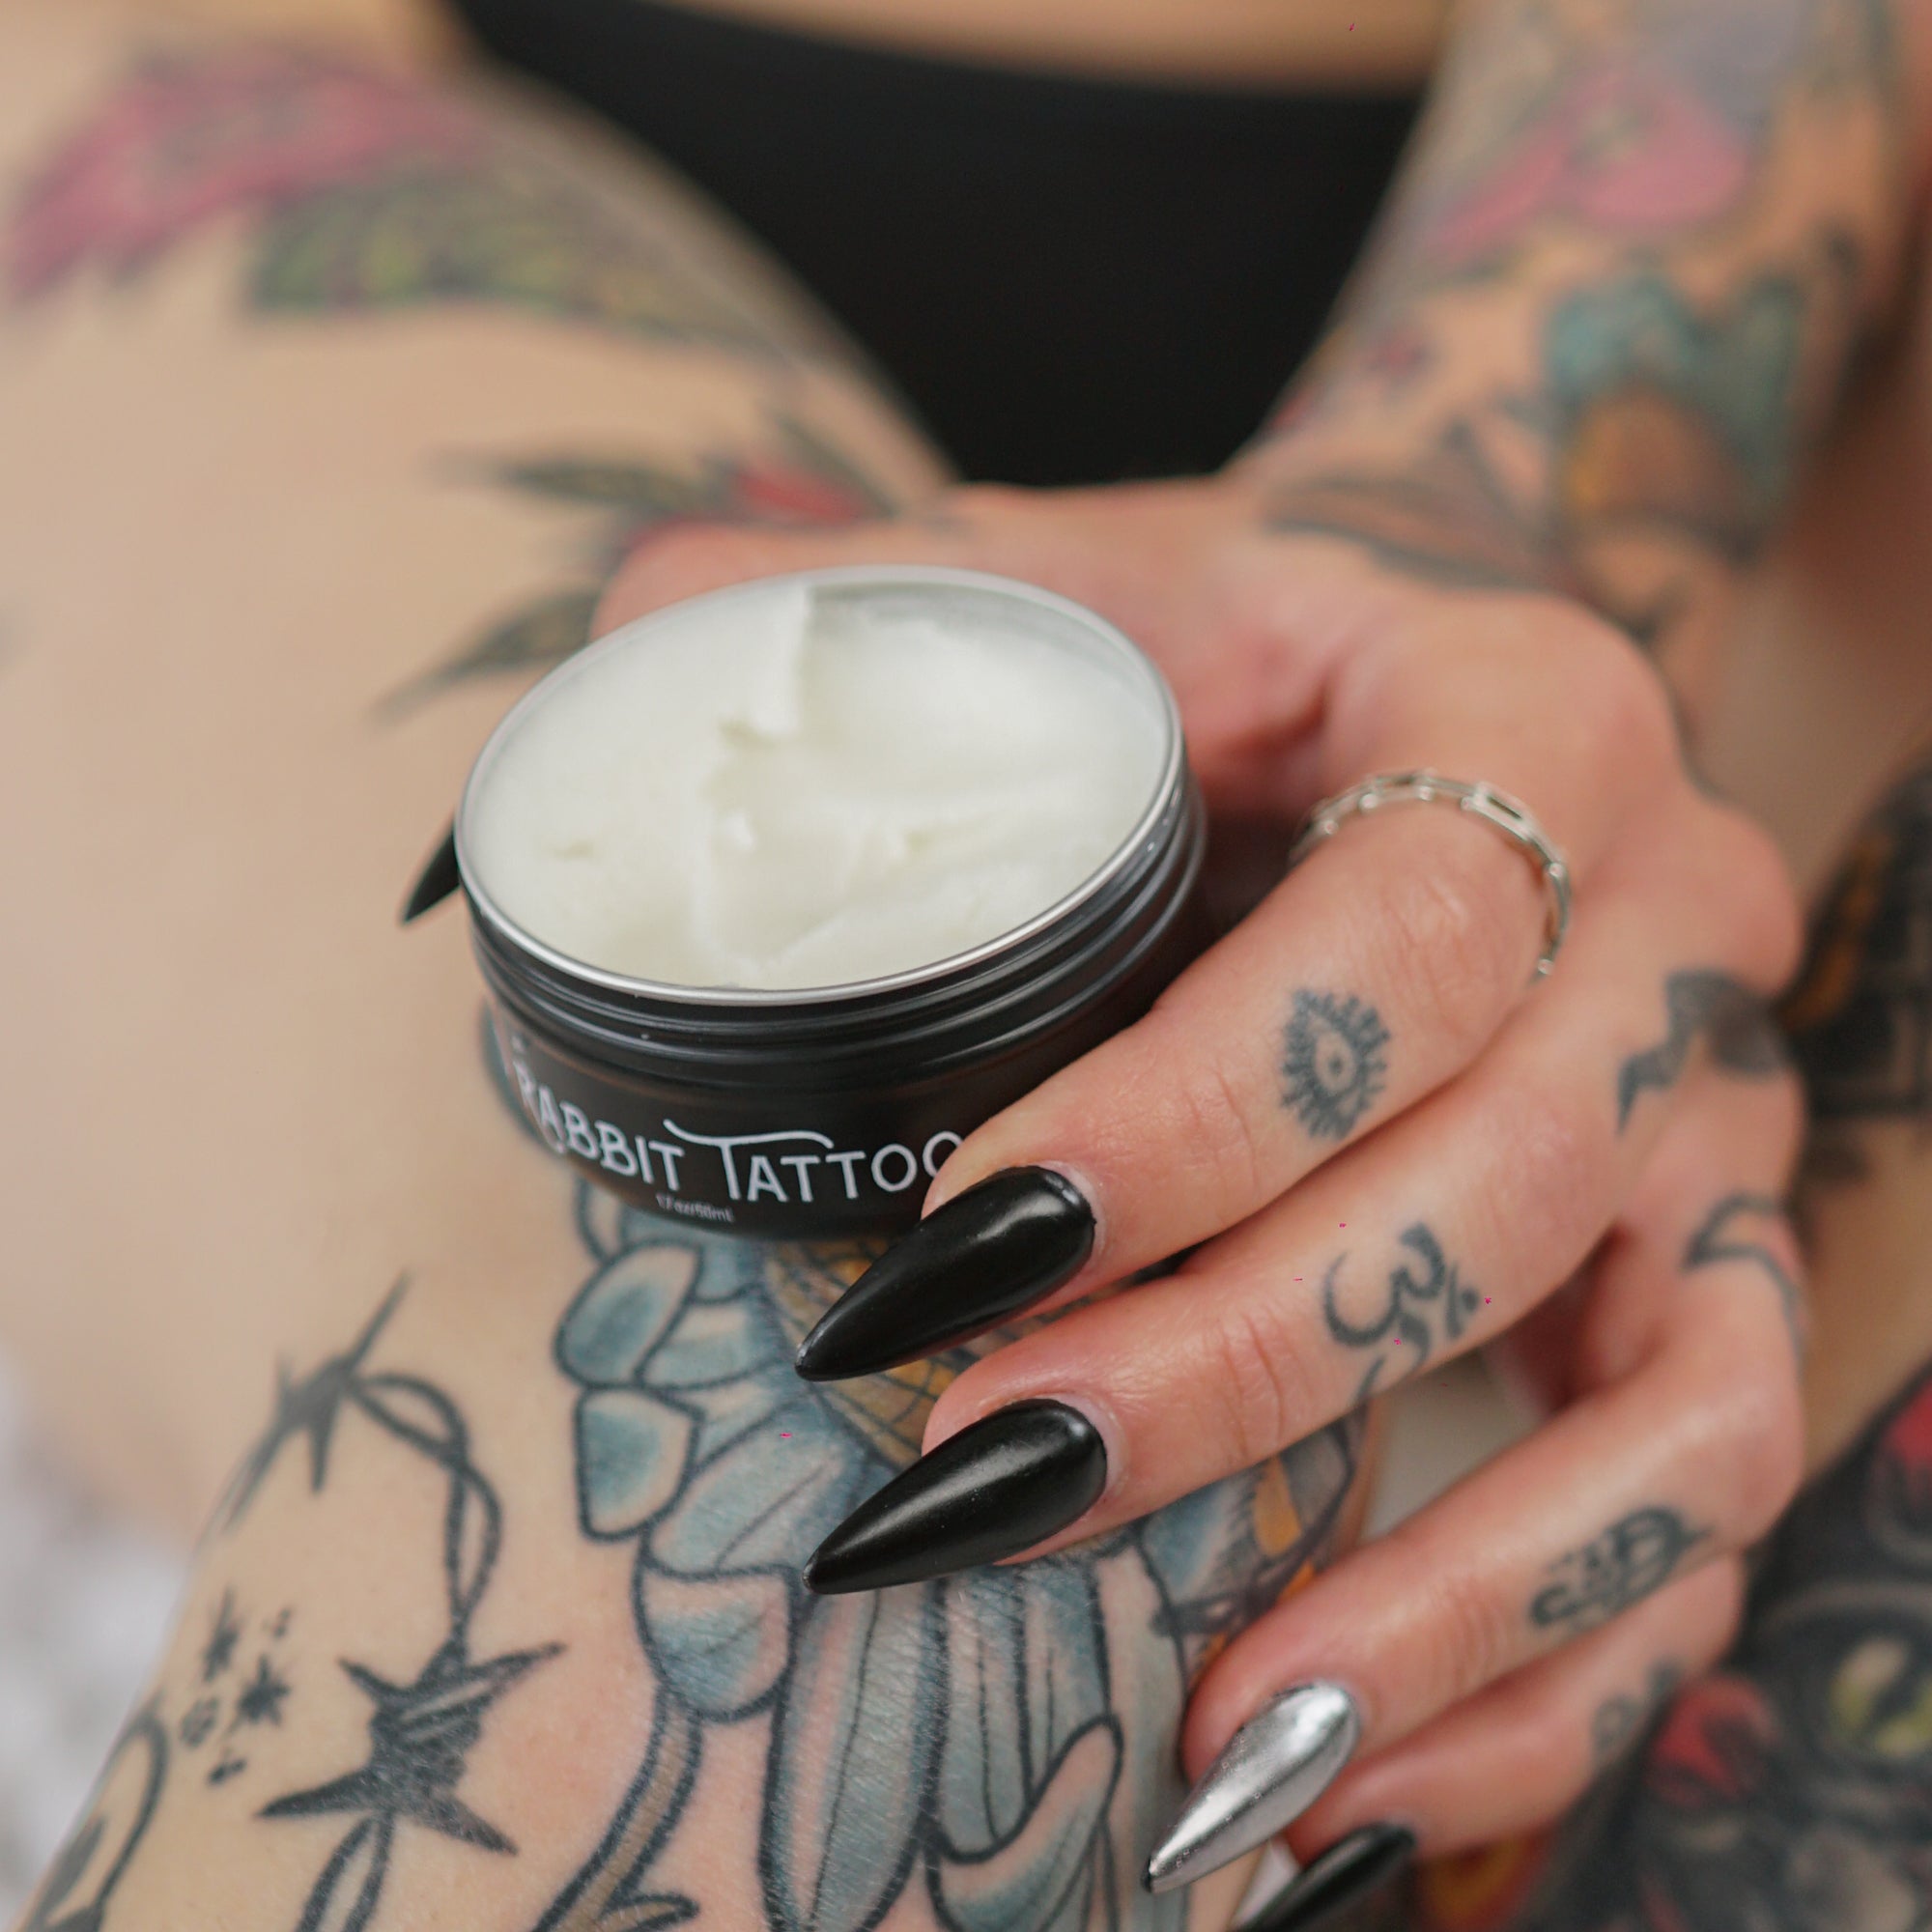 Is Cocoa Butter Good For Tattoos?